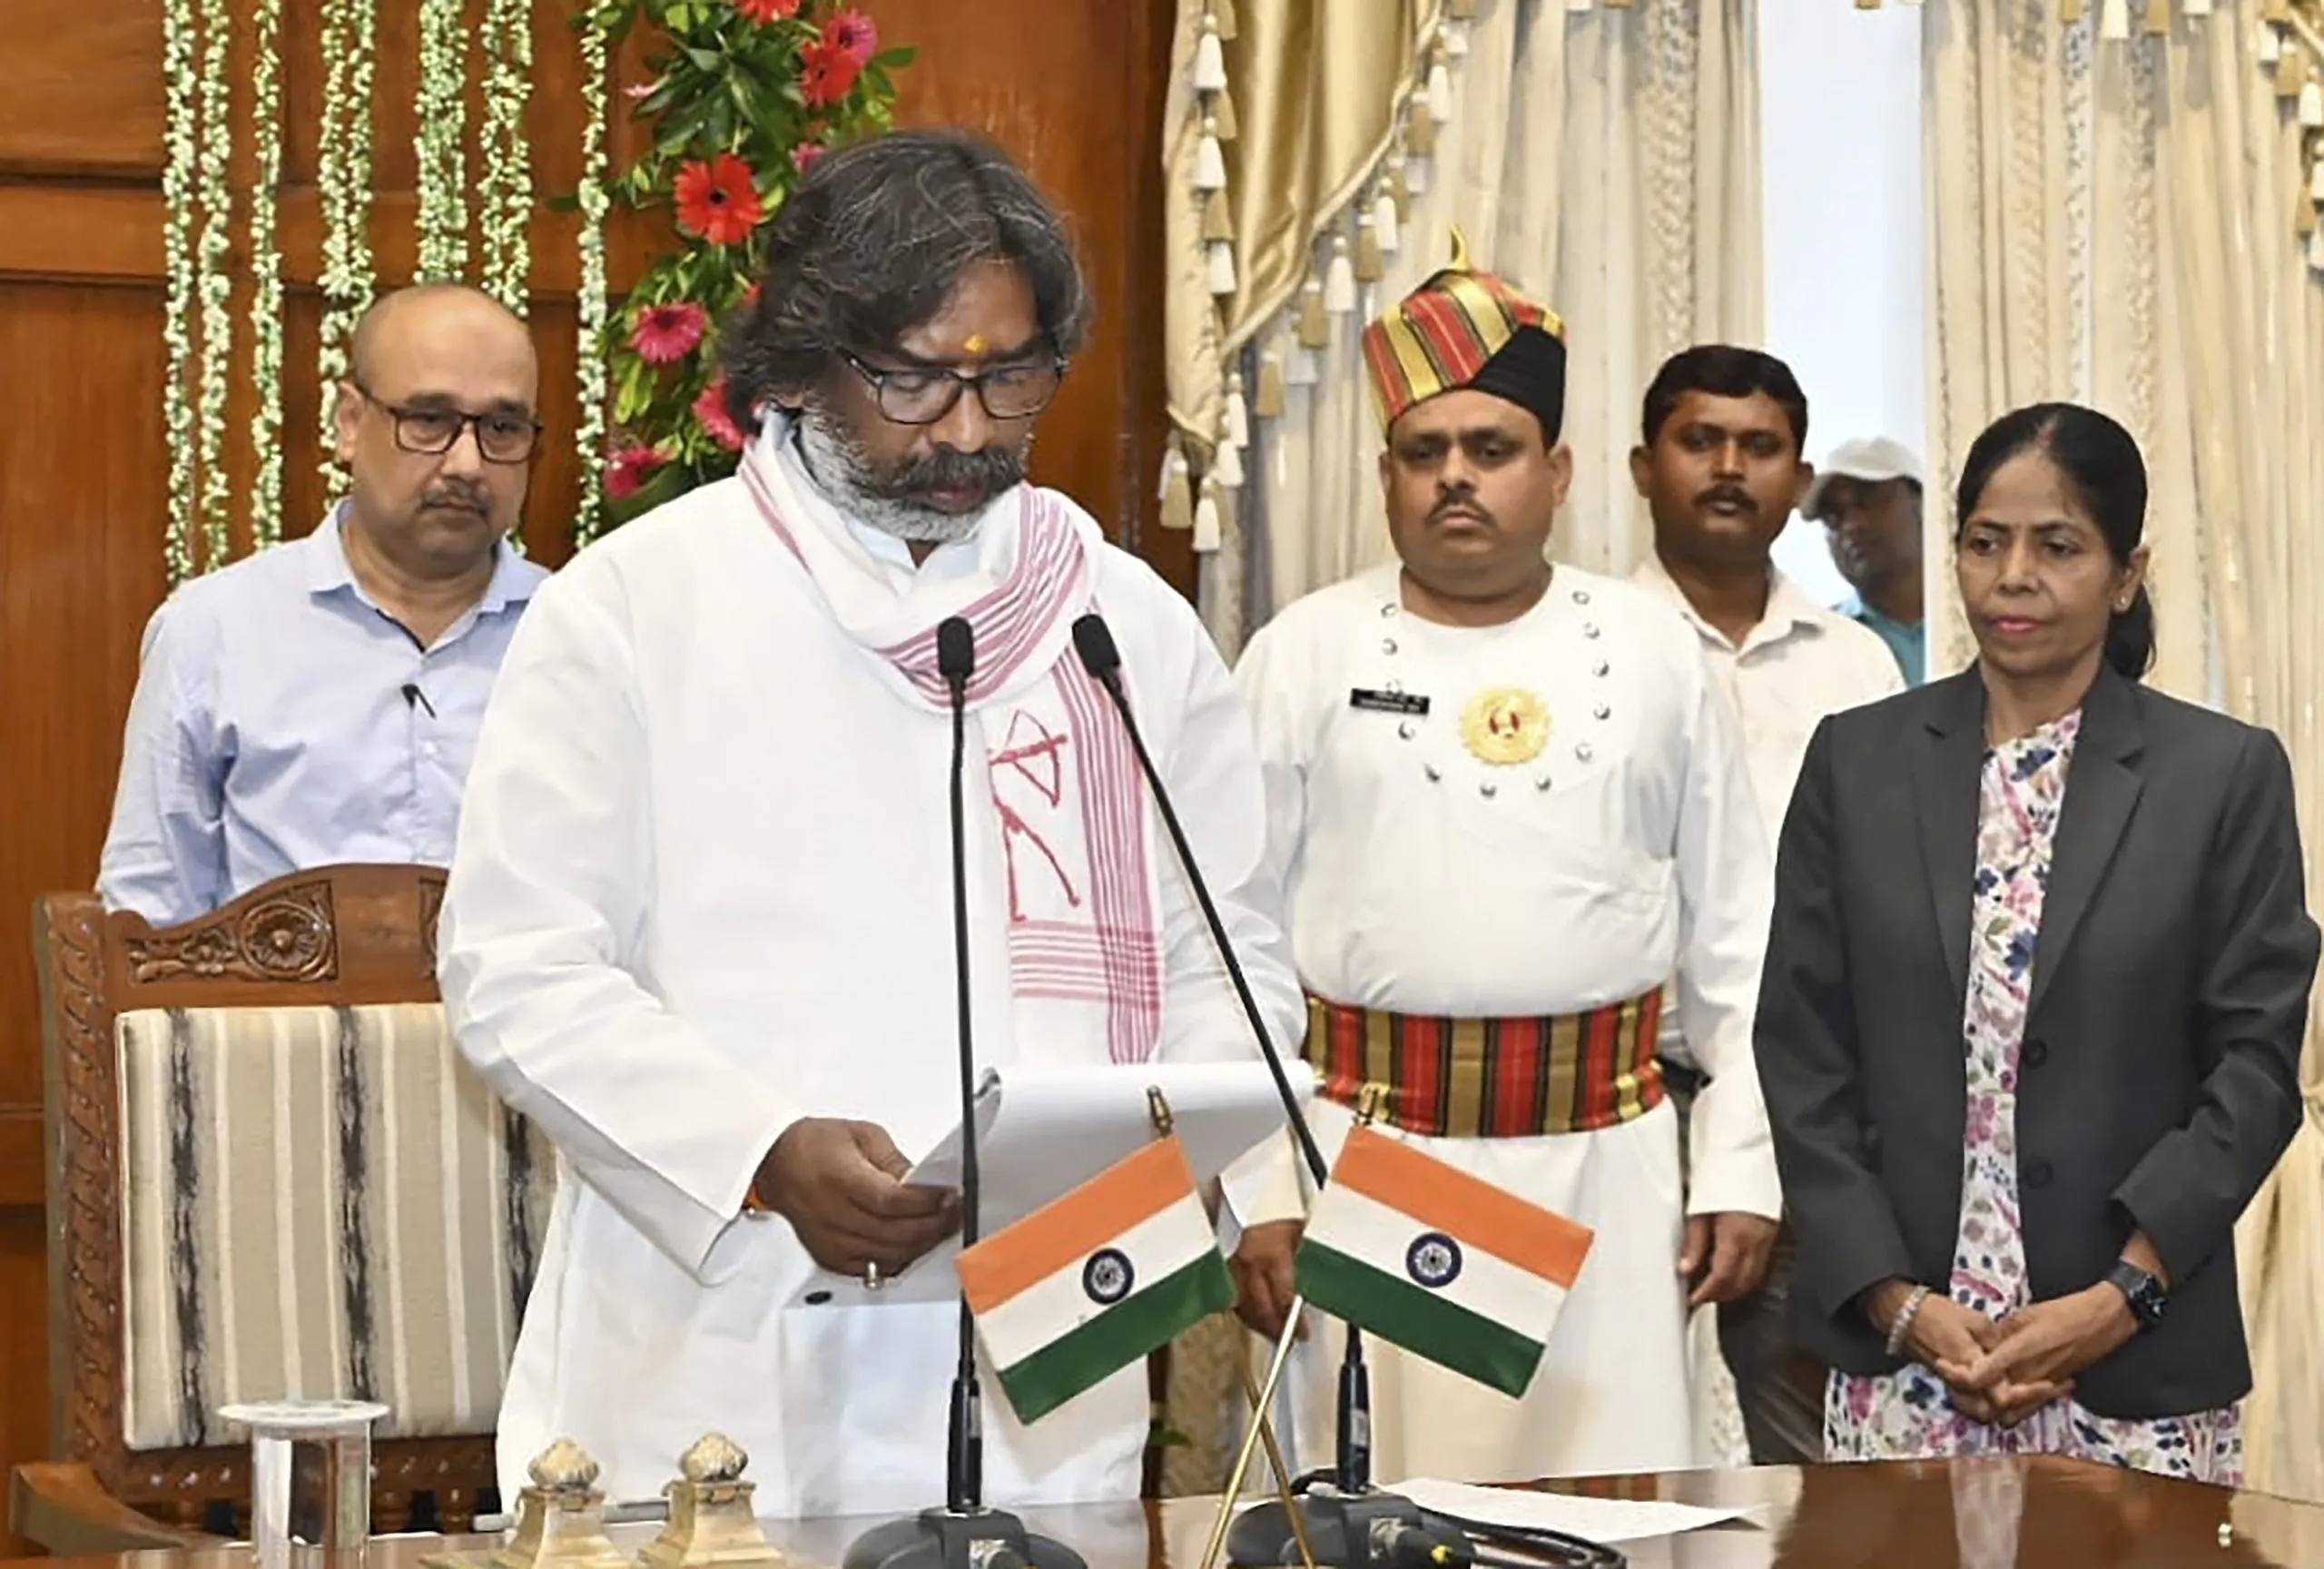 Hemant Soren is the Chief Minister of Jharkhand for the third time